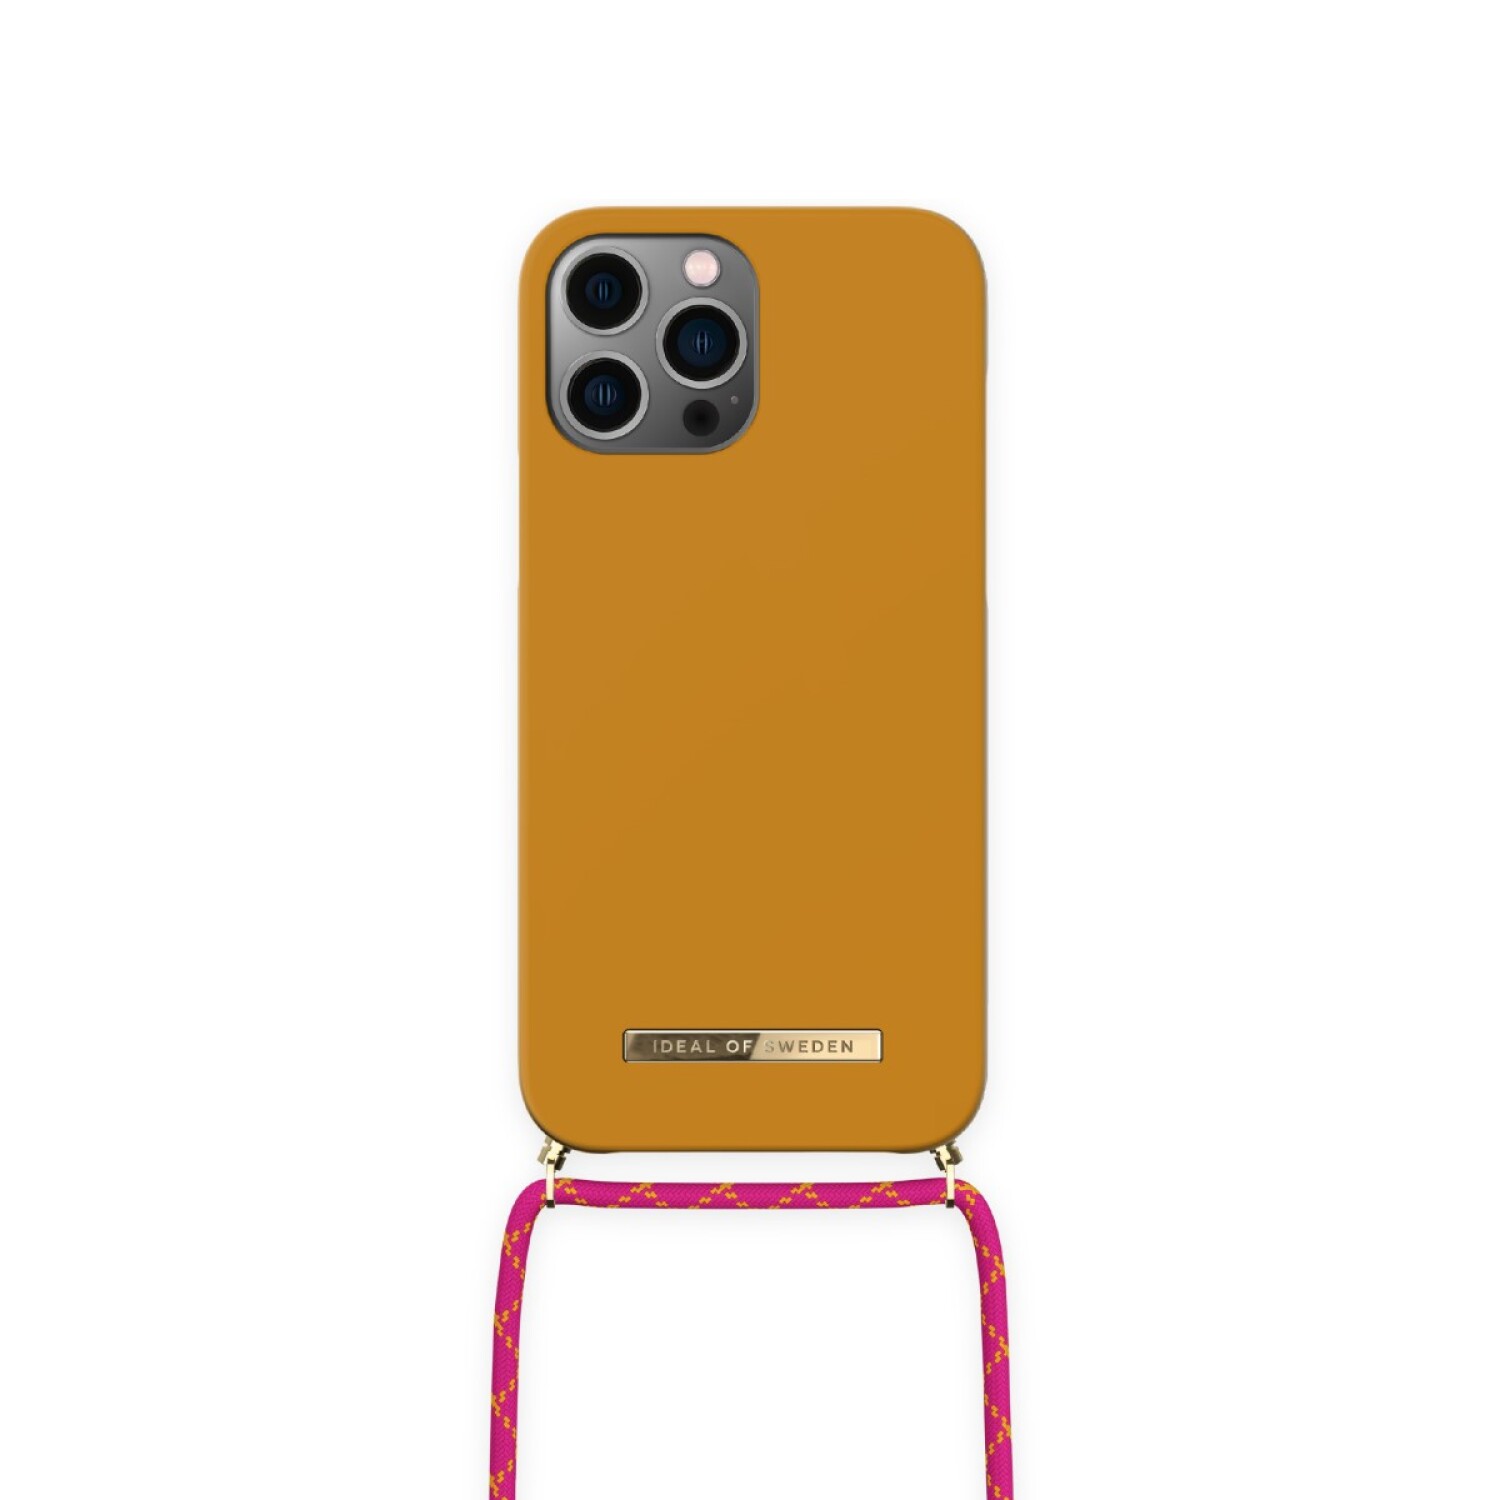 Protector Necklace Case Ideal of Sweden Correa iPhone 12 / 13 Pro Max -  Ochre yellow — Cover company